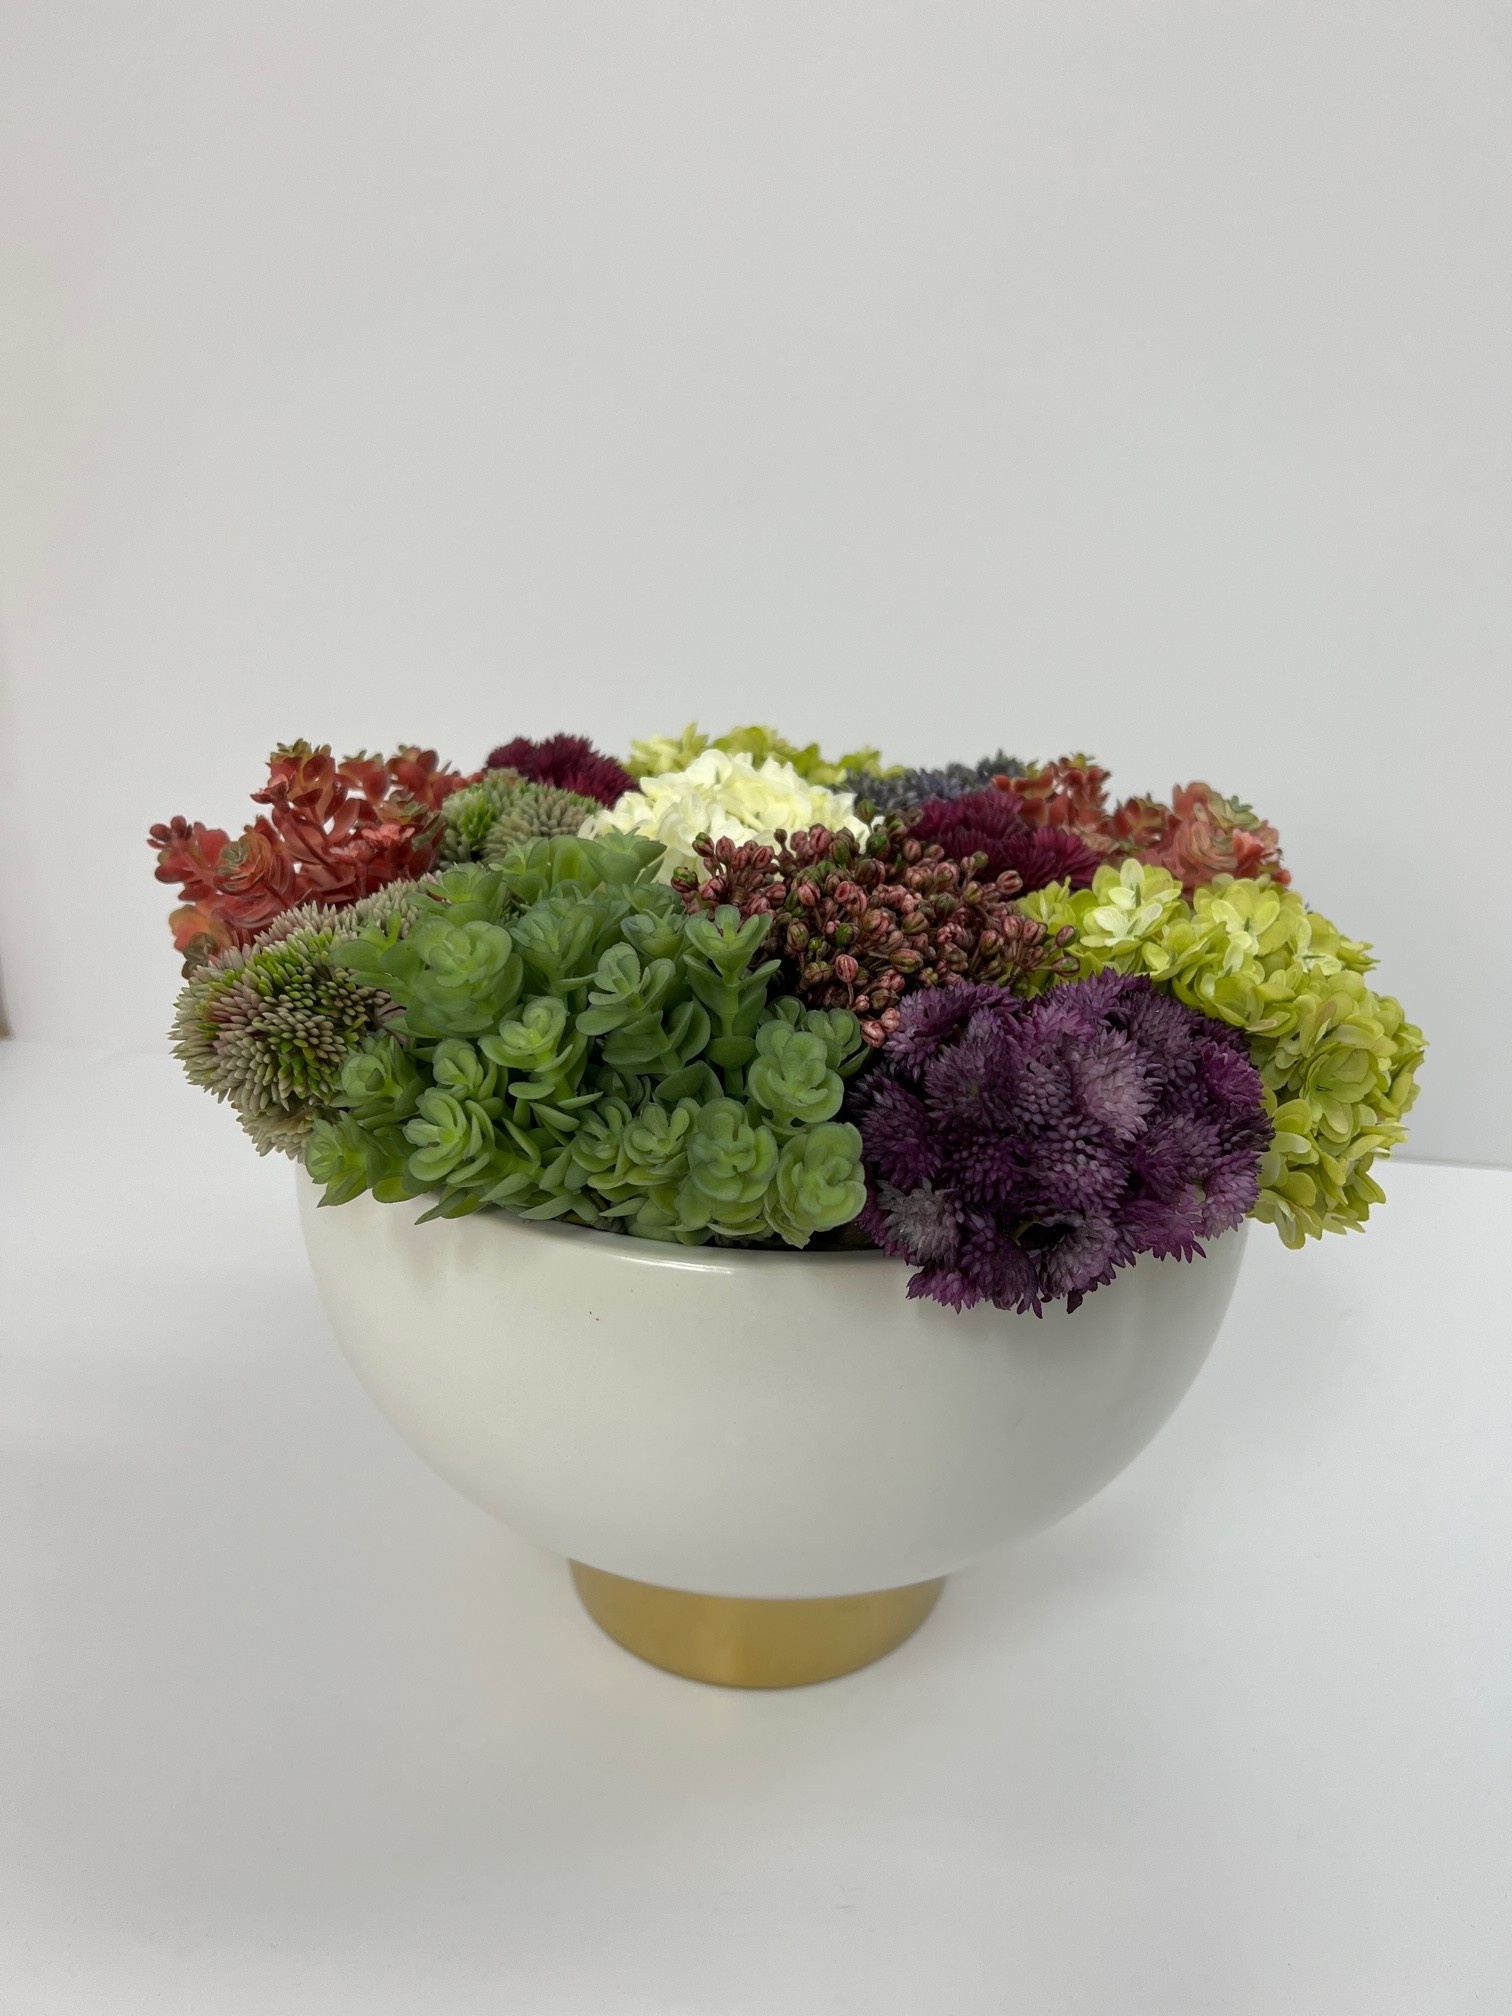 Floral Arrangment in White & Gold Bowl